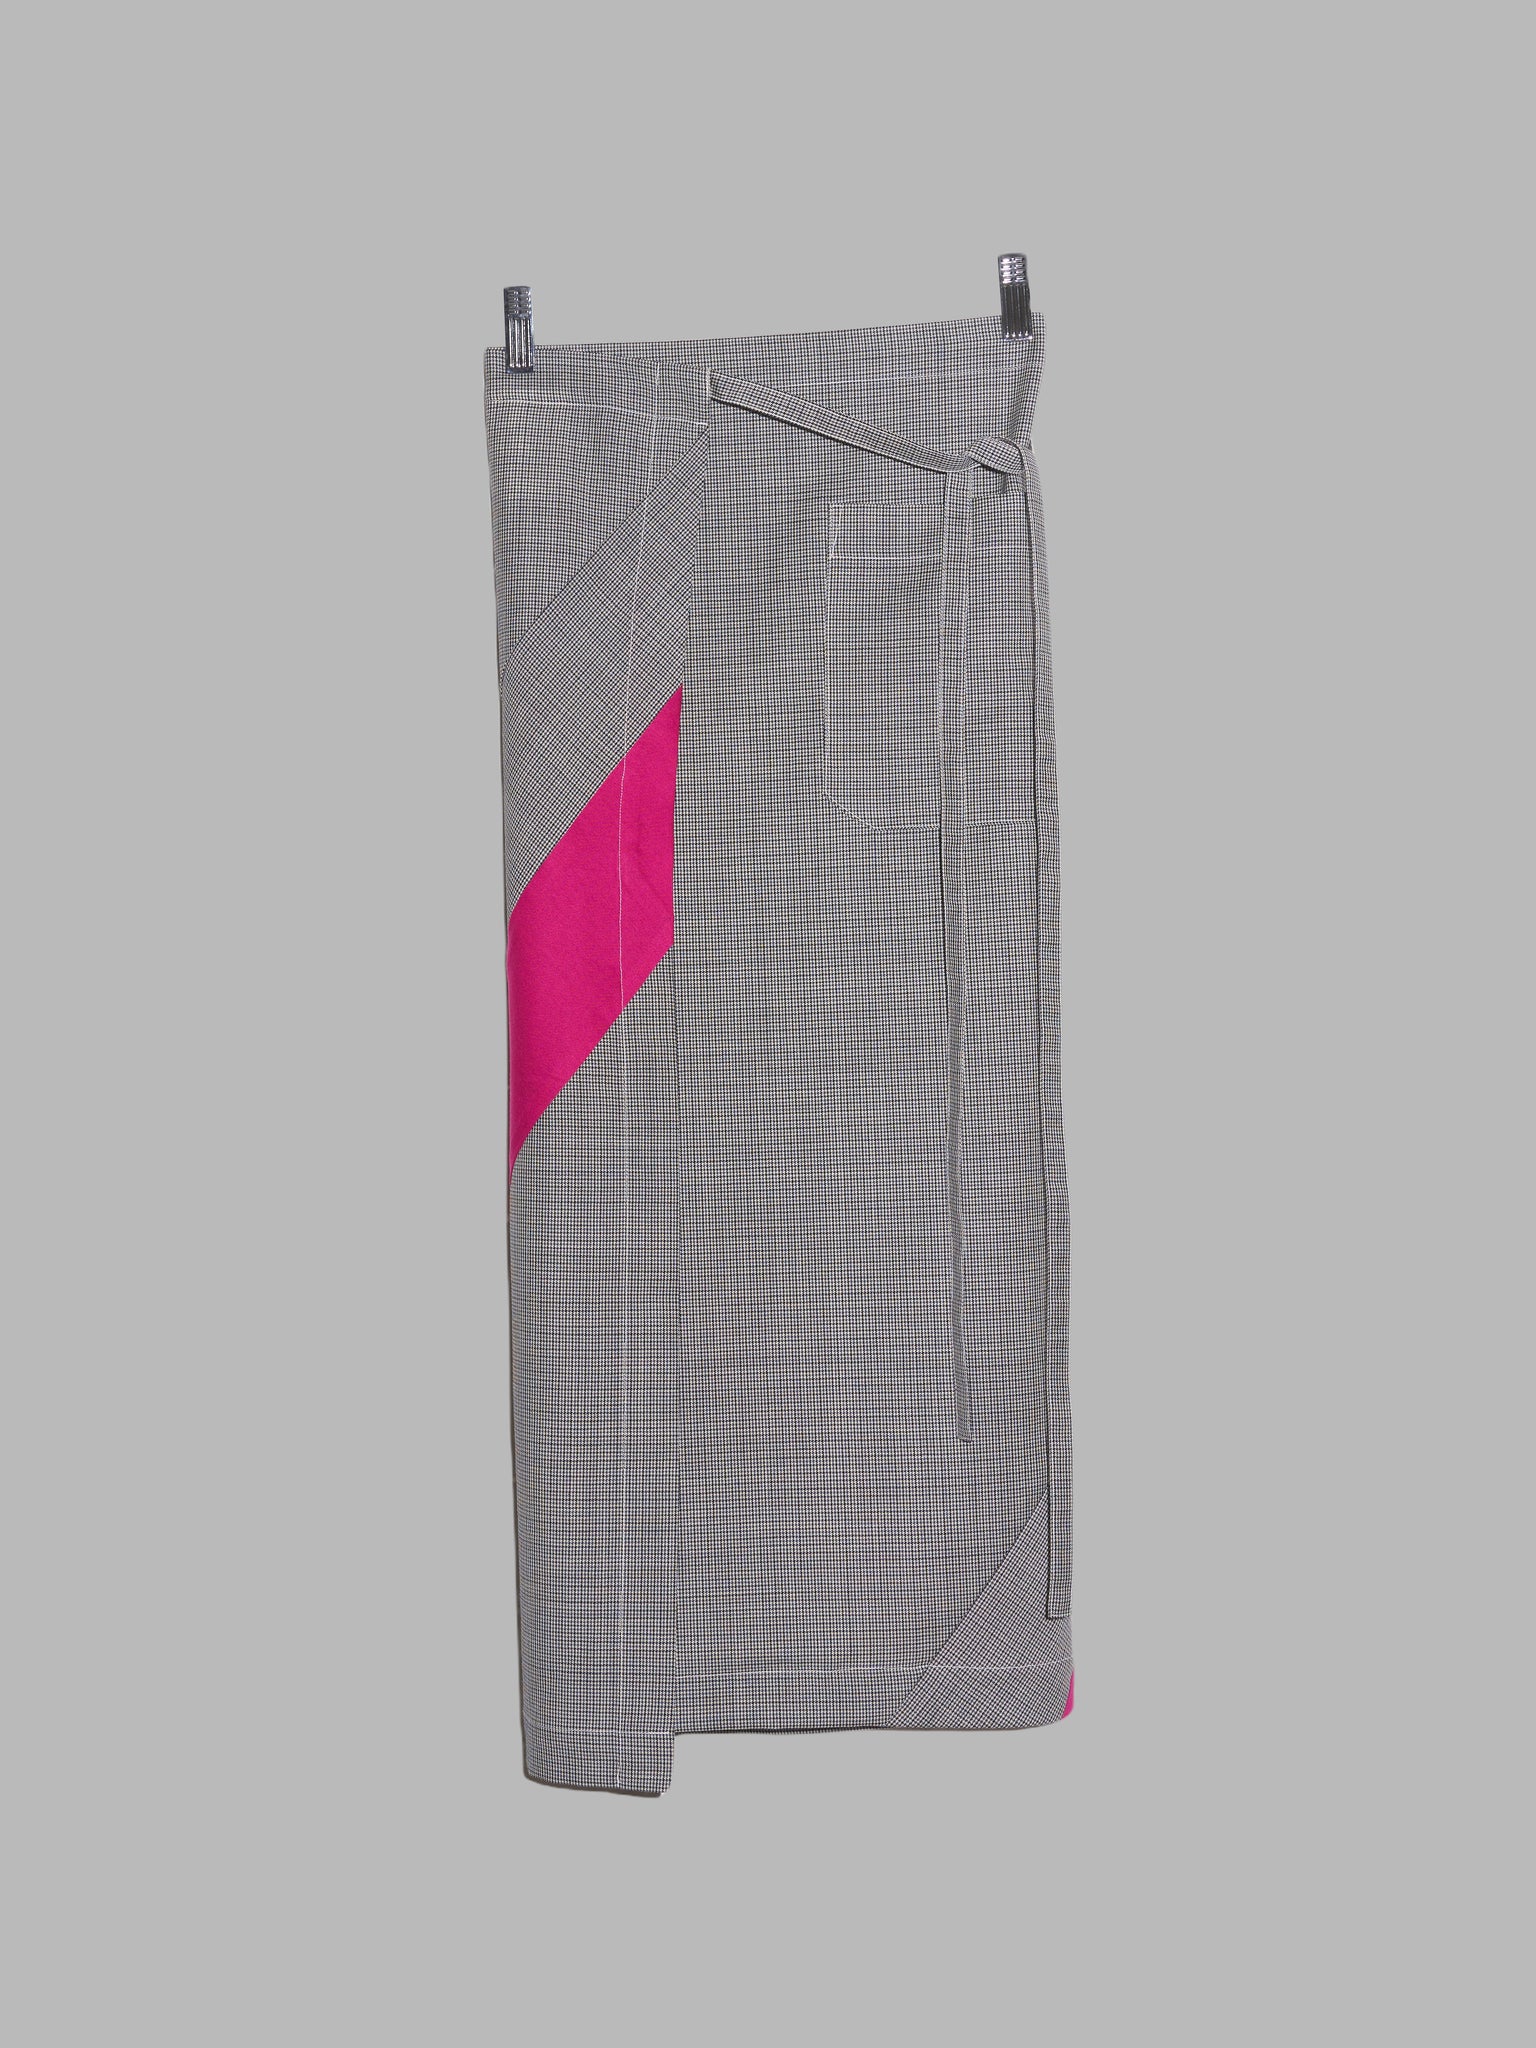 Tricot Comme des Garcons SS2001 grey puppytooth wrap skirt with pink stripe - S